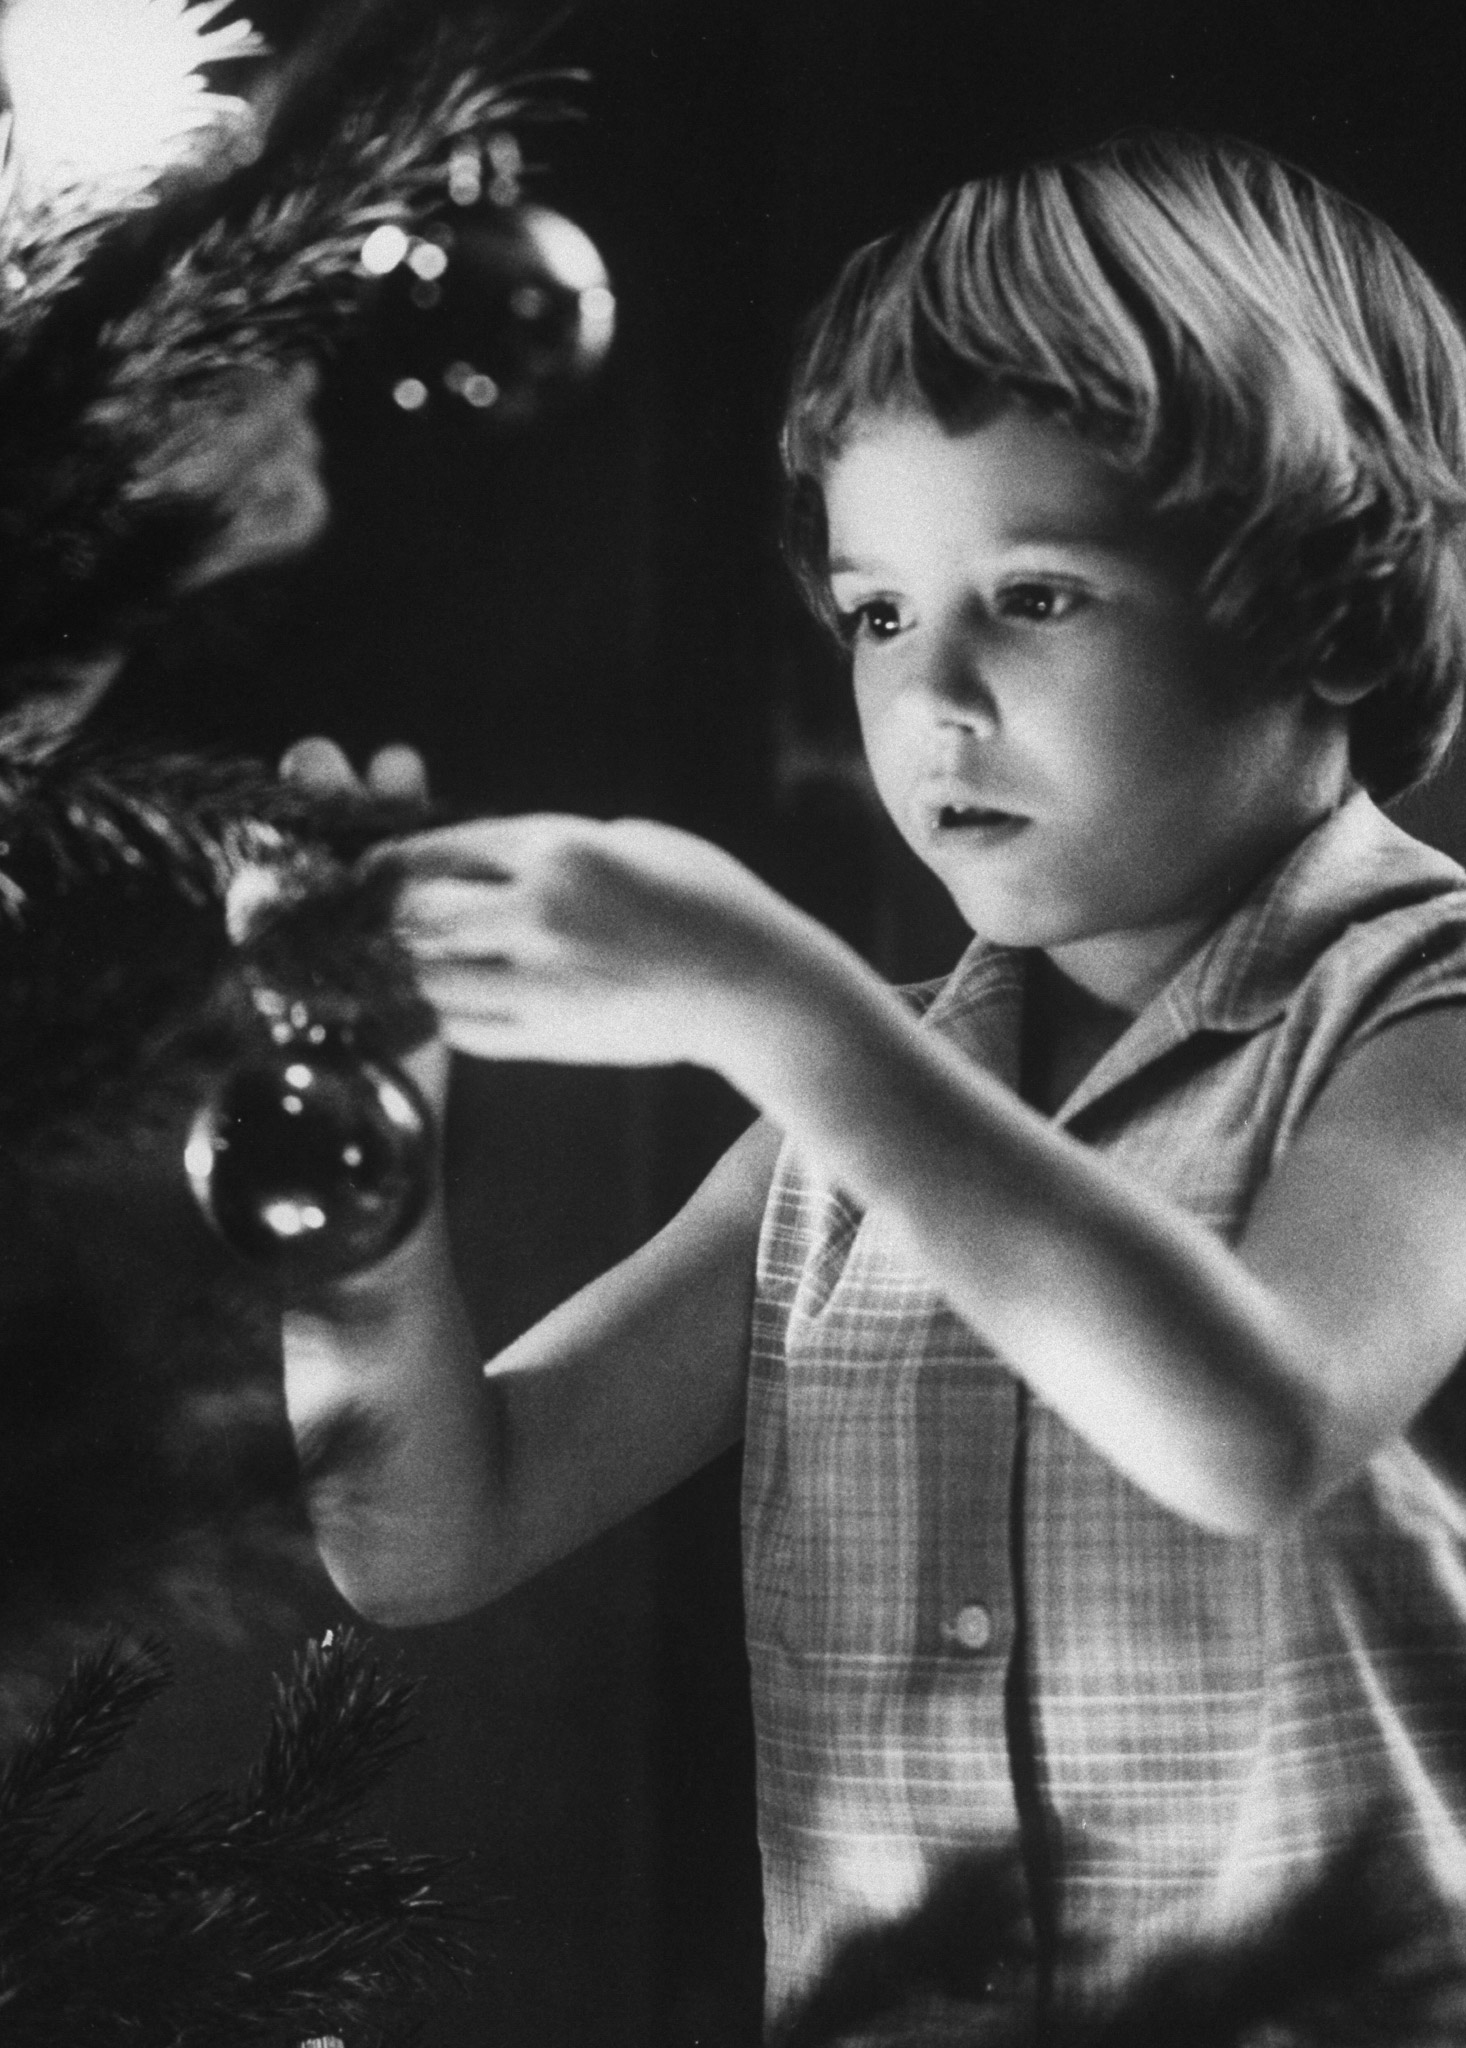 Tina Smith decorating a Christmas tree at Guantanamo Naval Base, where her dad, Lt. Commander Joe Smith is stationed, 1962.